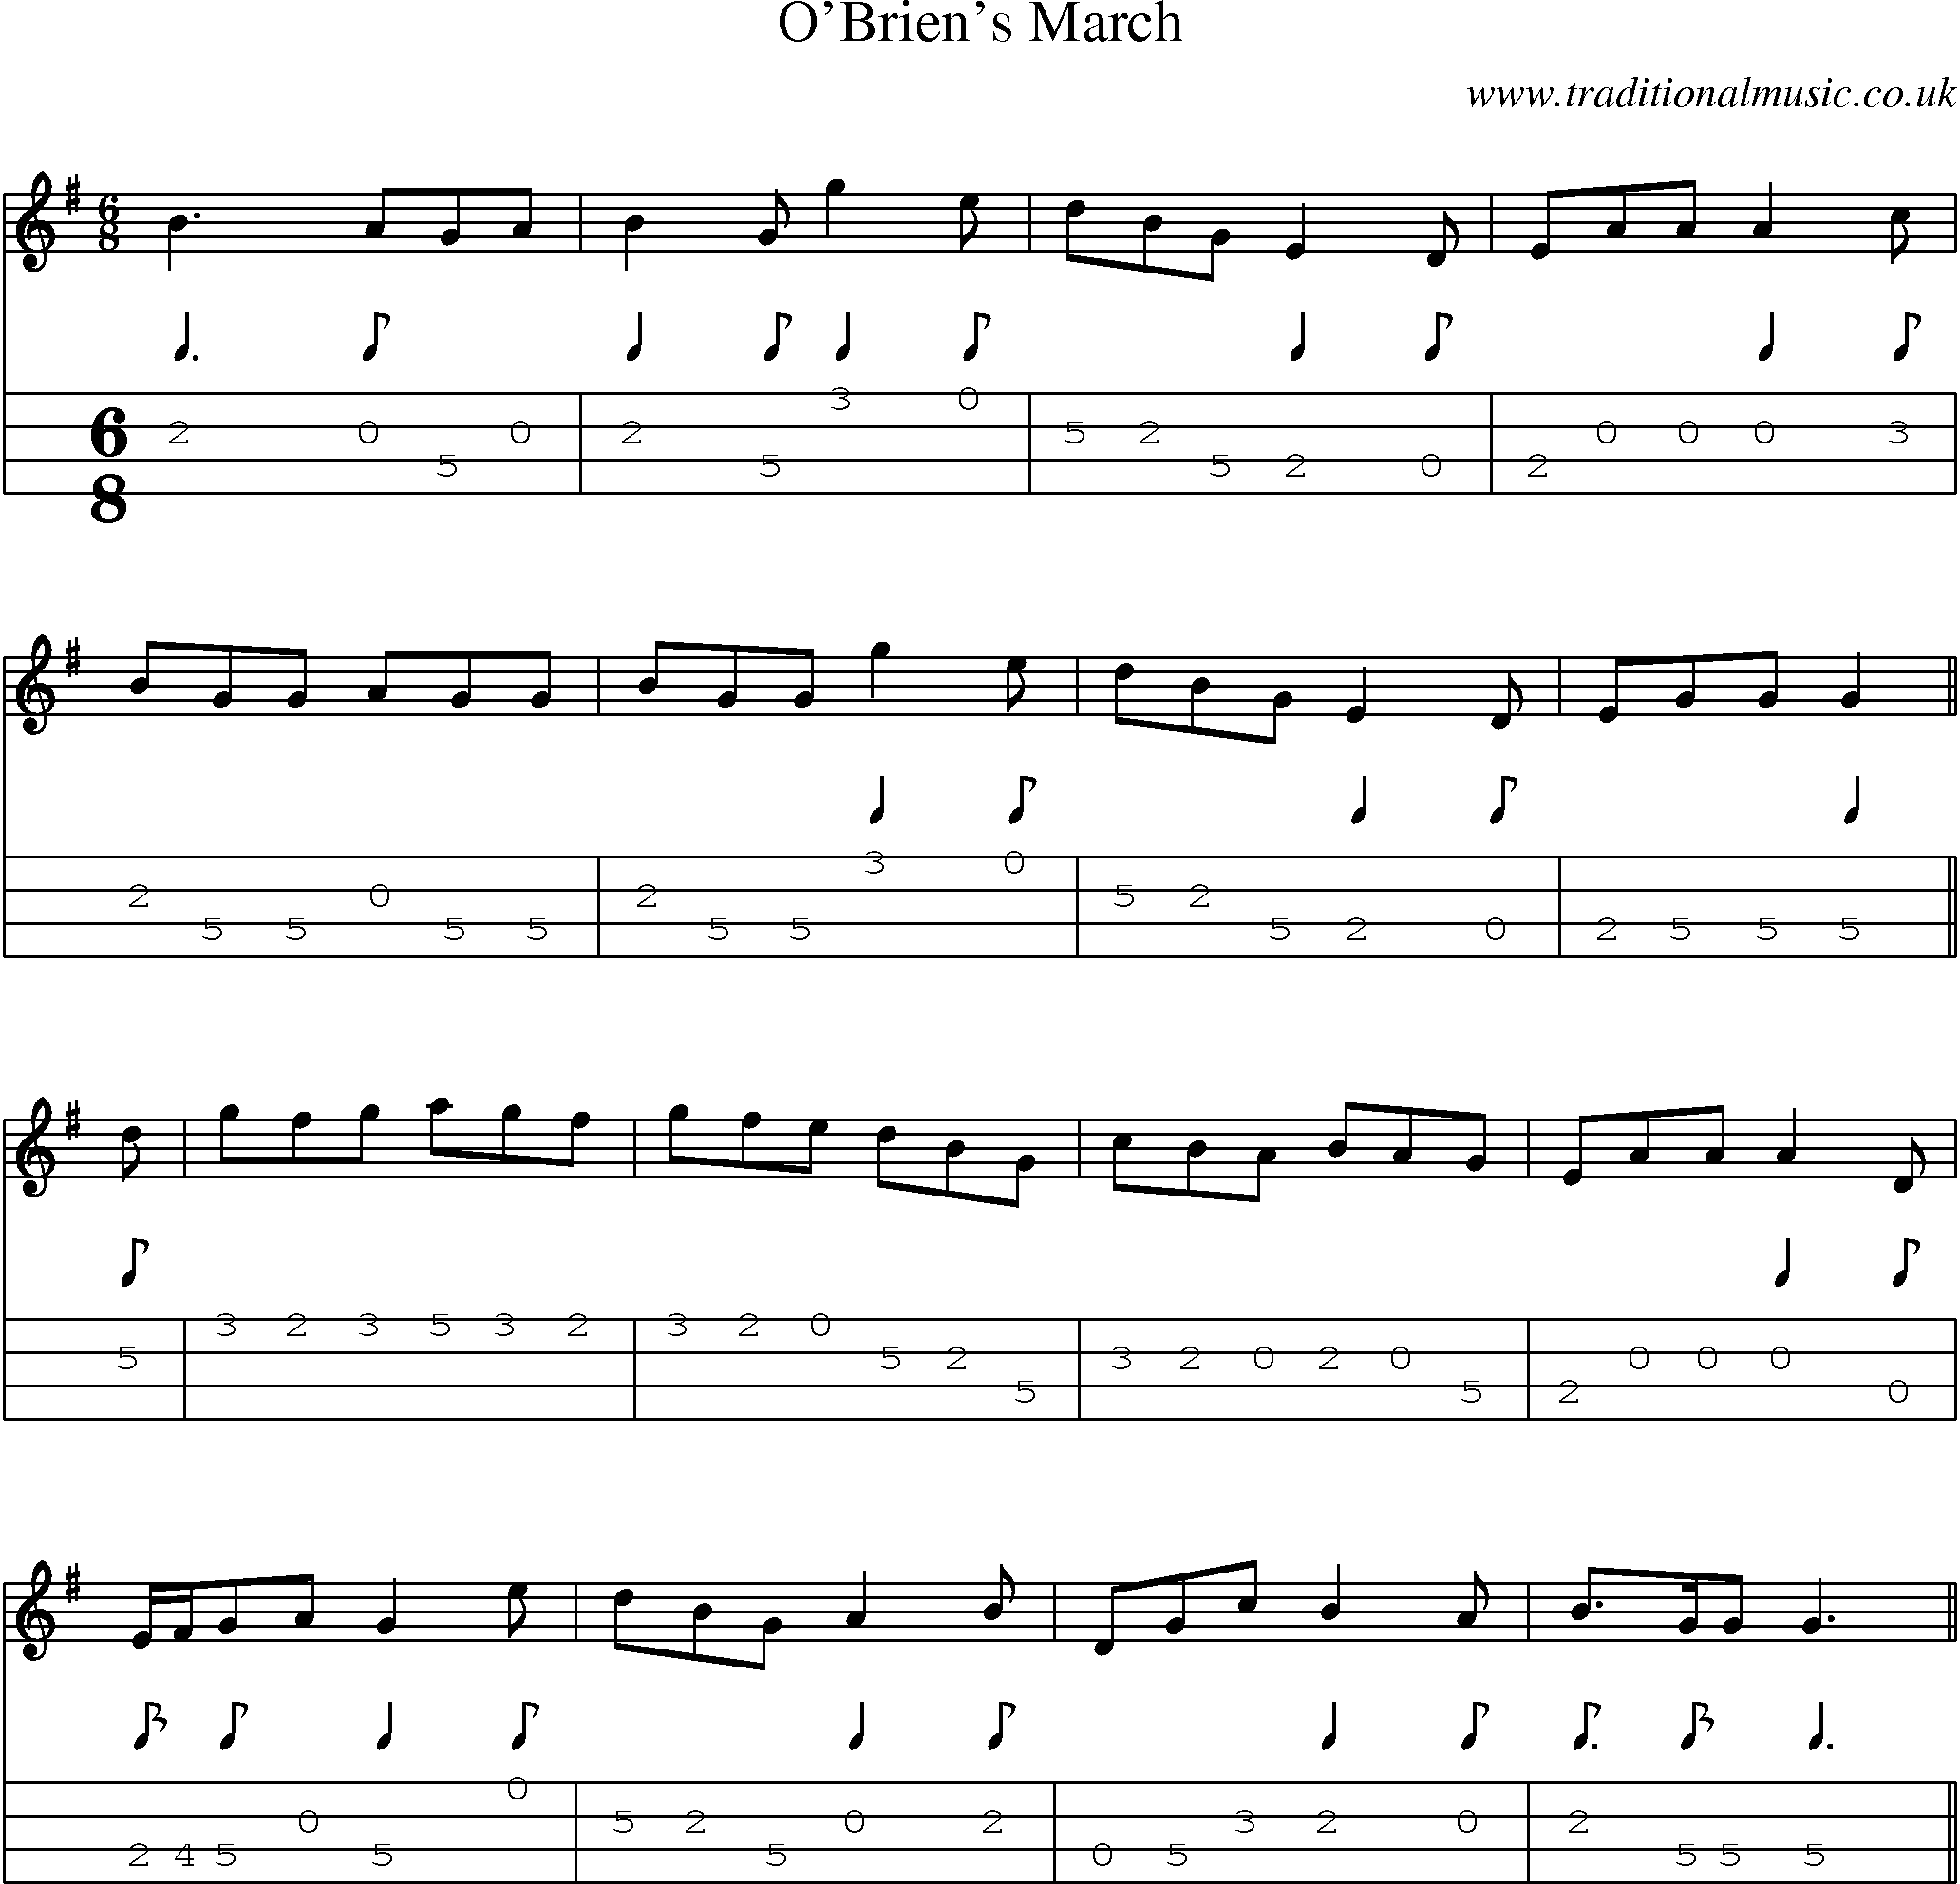 Music Score and Mandolin Tabs for Obriens March